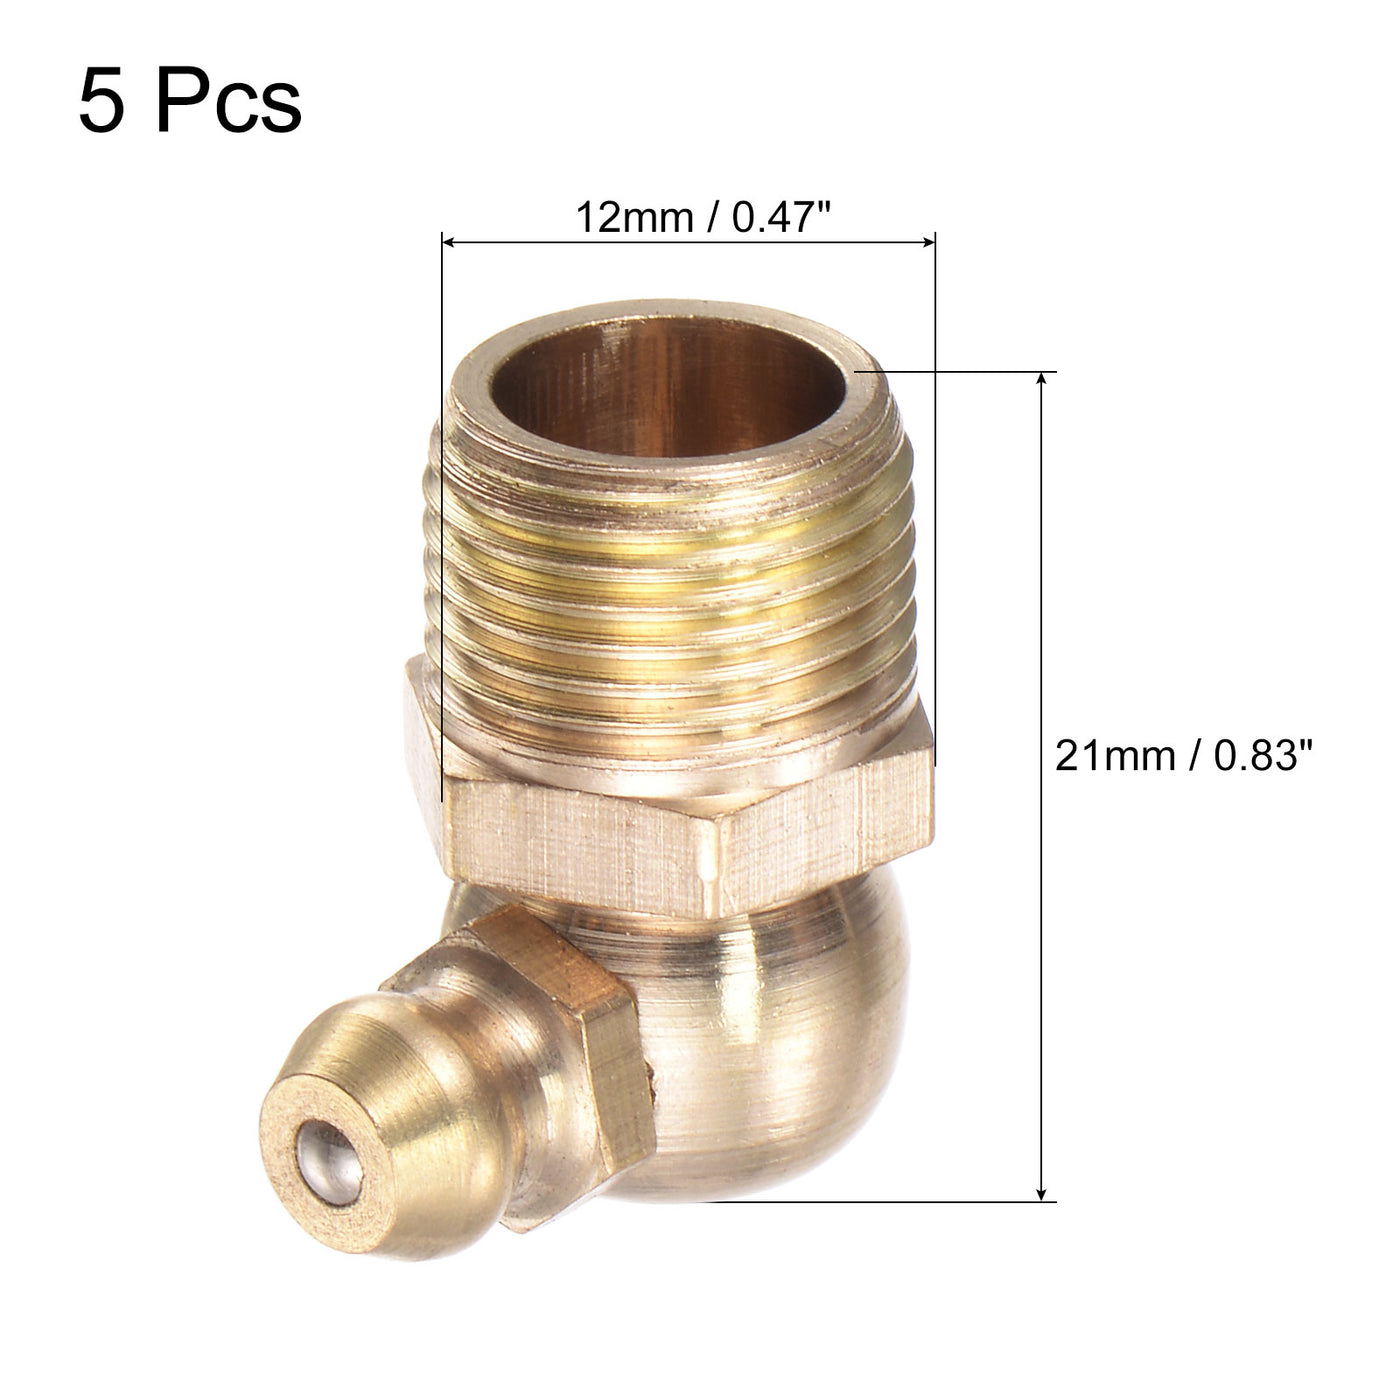 Uxcell Uxcell Brass 90 Degree Hydraulic Grease Fitting M6 x 1mm Thread, 5Pcs